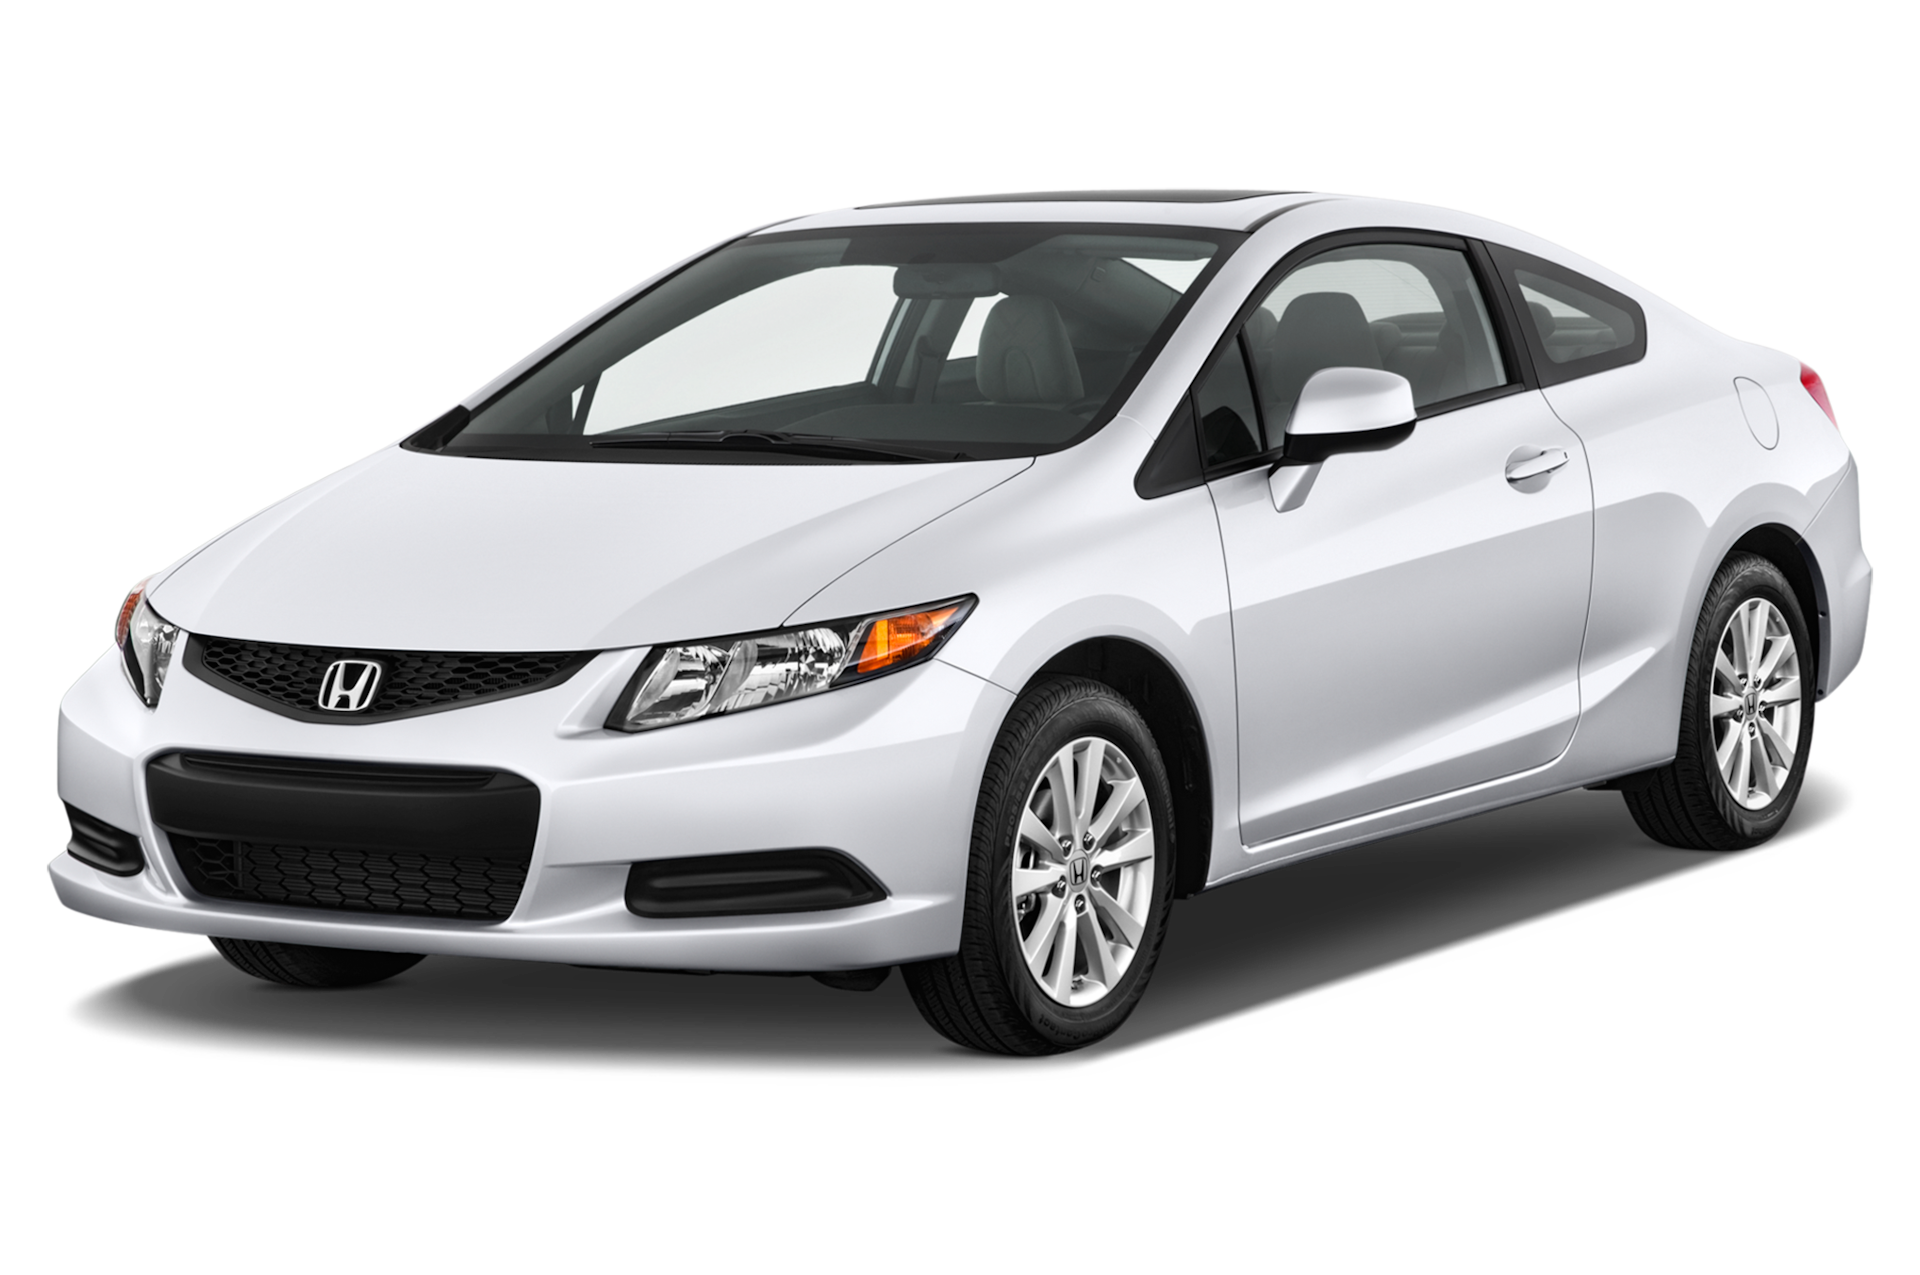 2012 Honda Civic Prices, Reviews, and Photos - MotorTrend